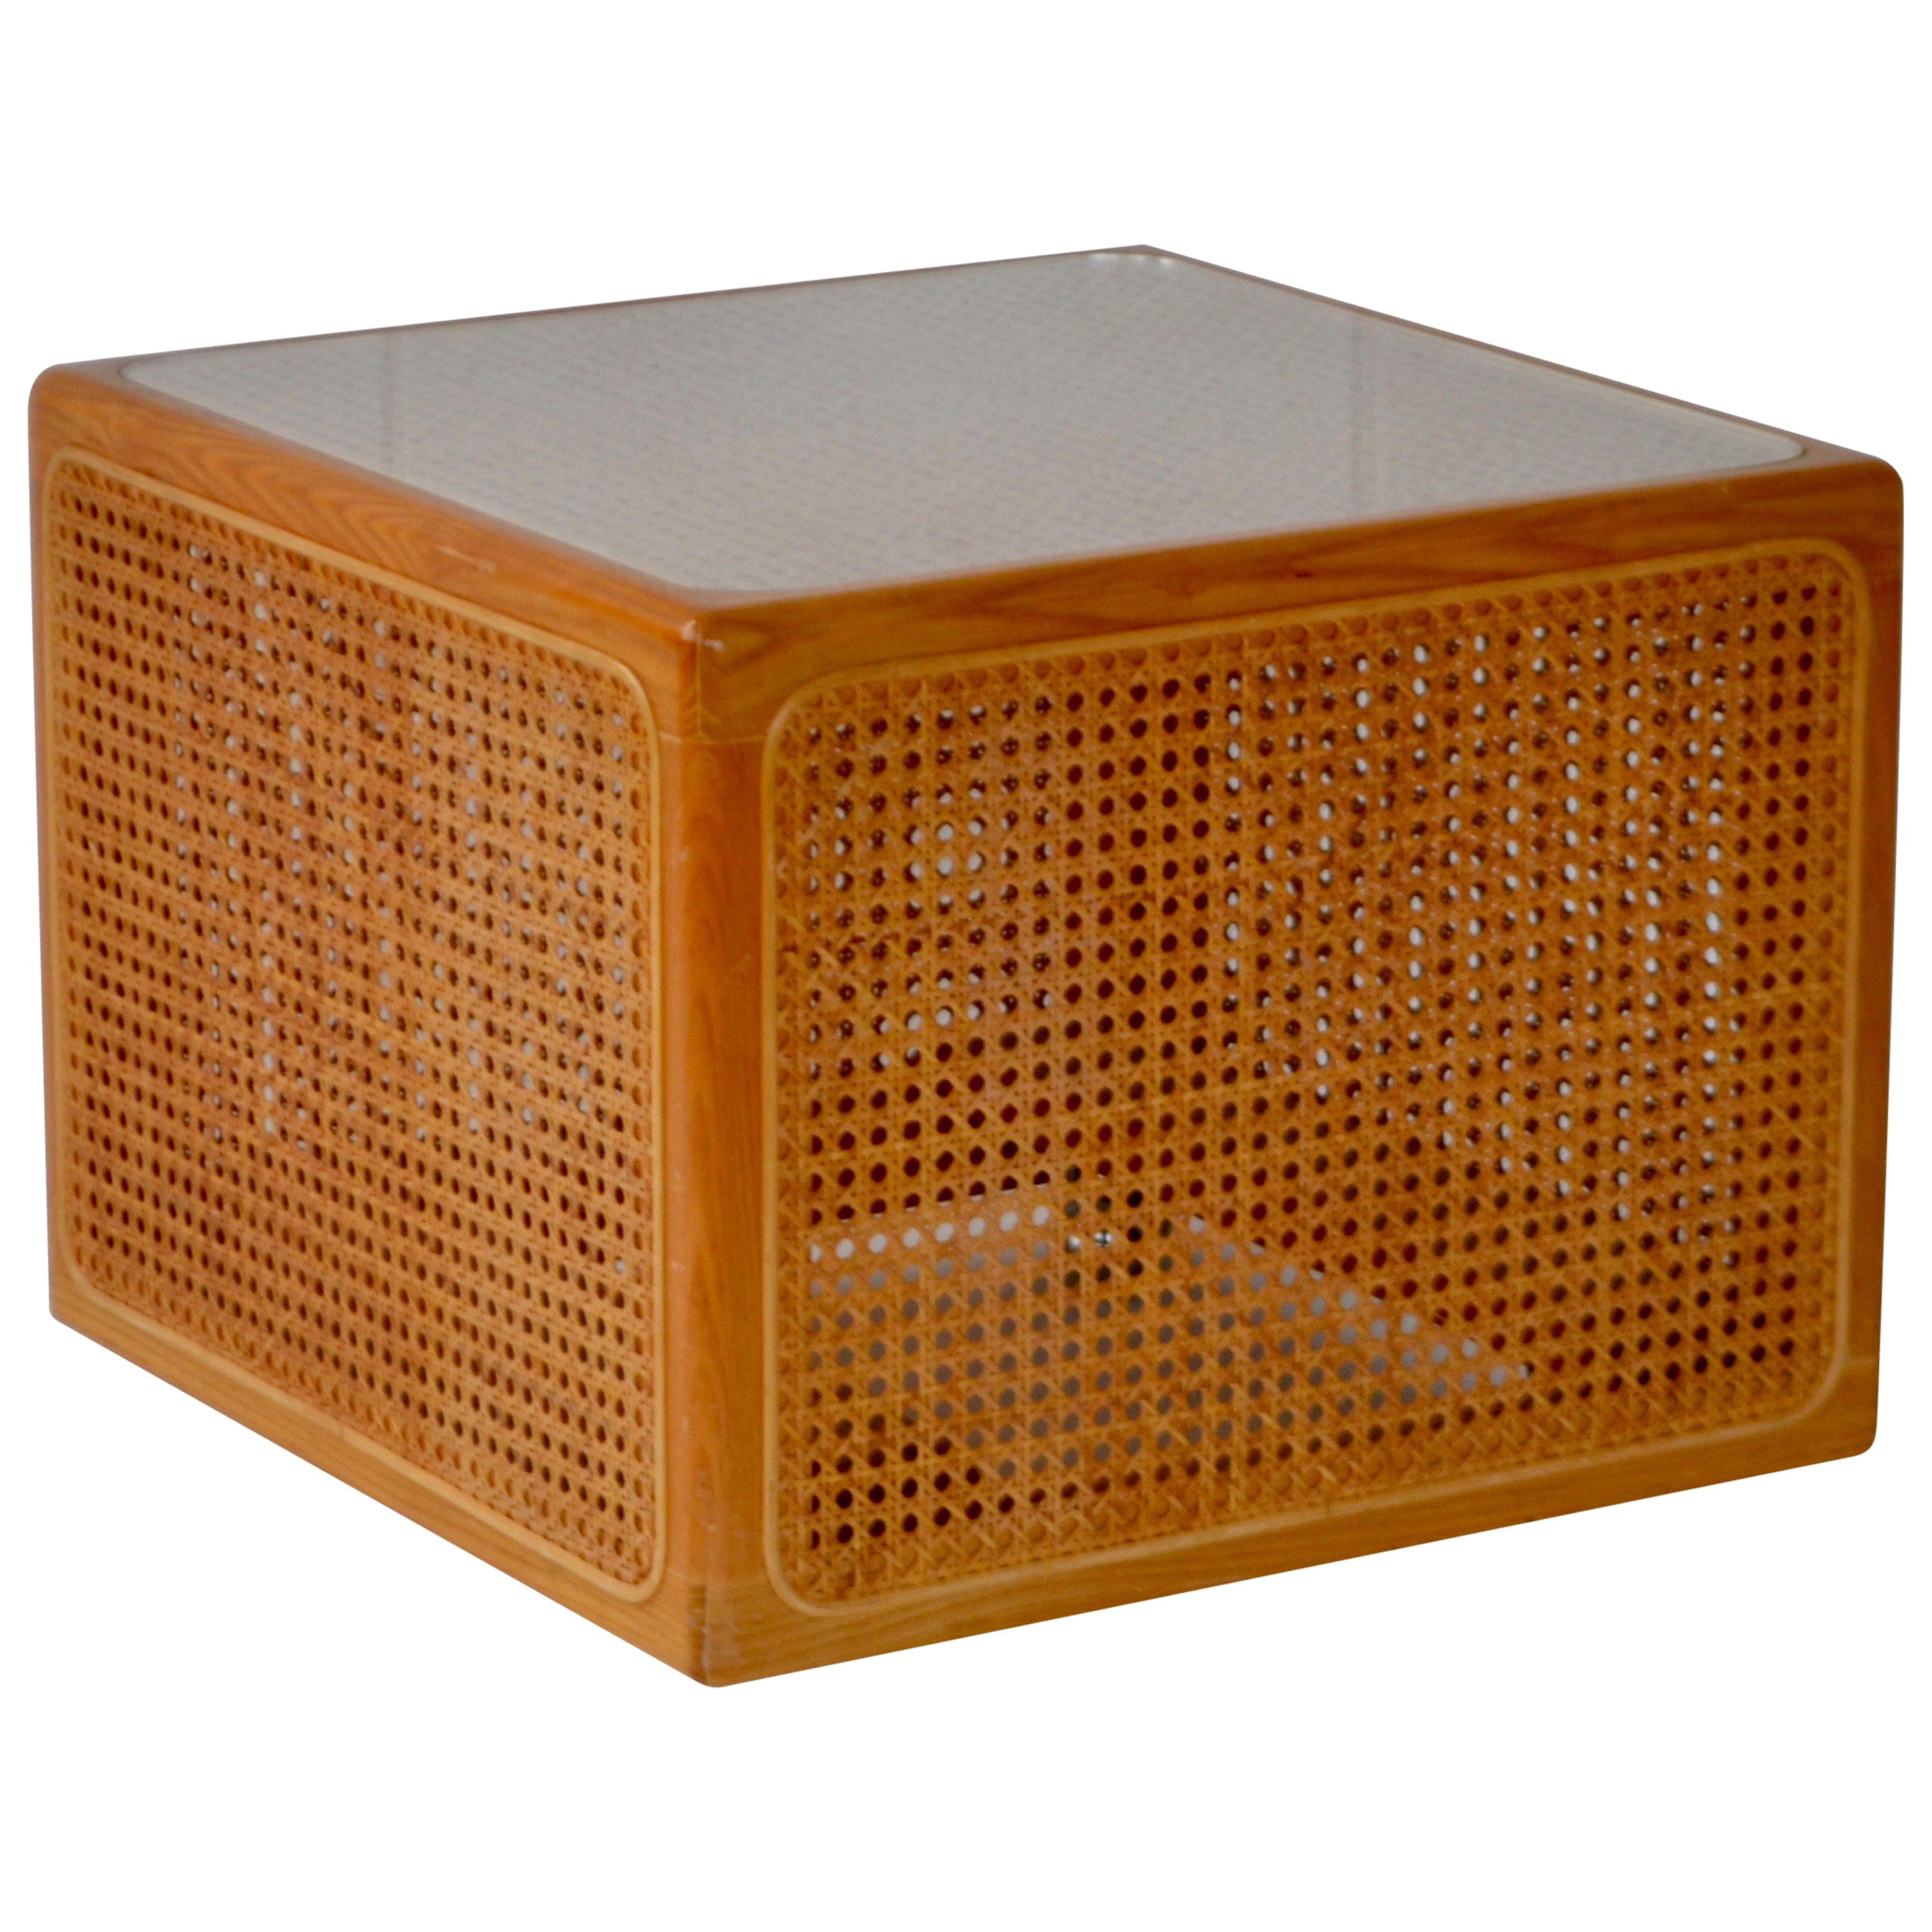 Midcentury Woven Cane Cube Form Side Table For Sale